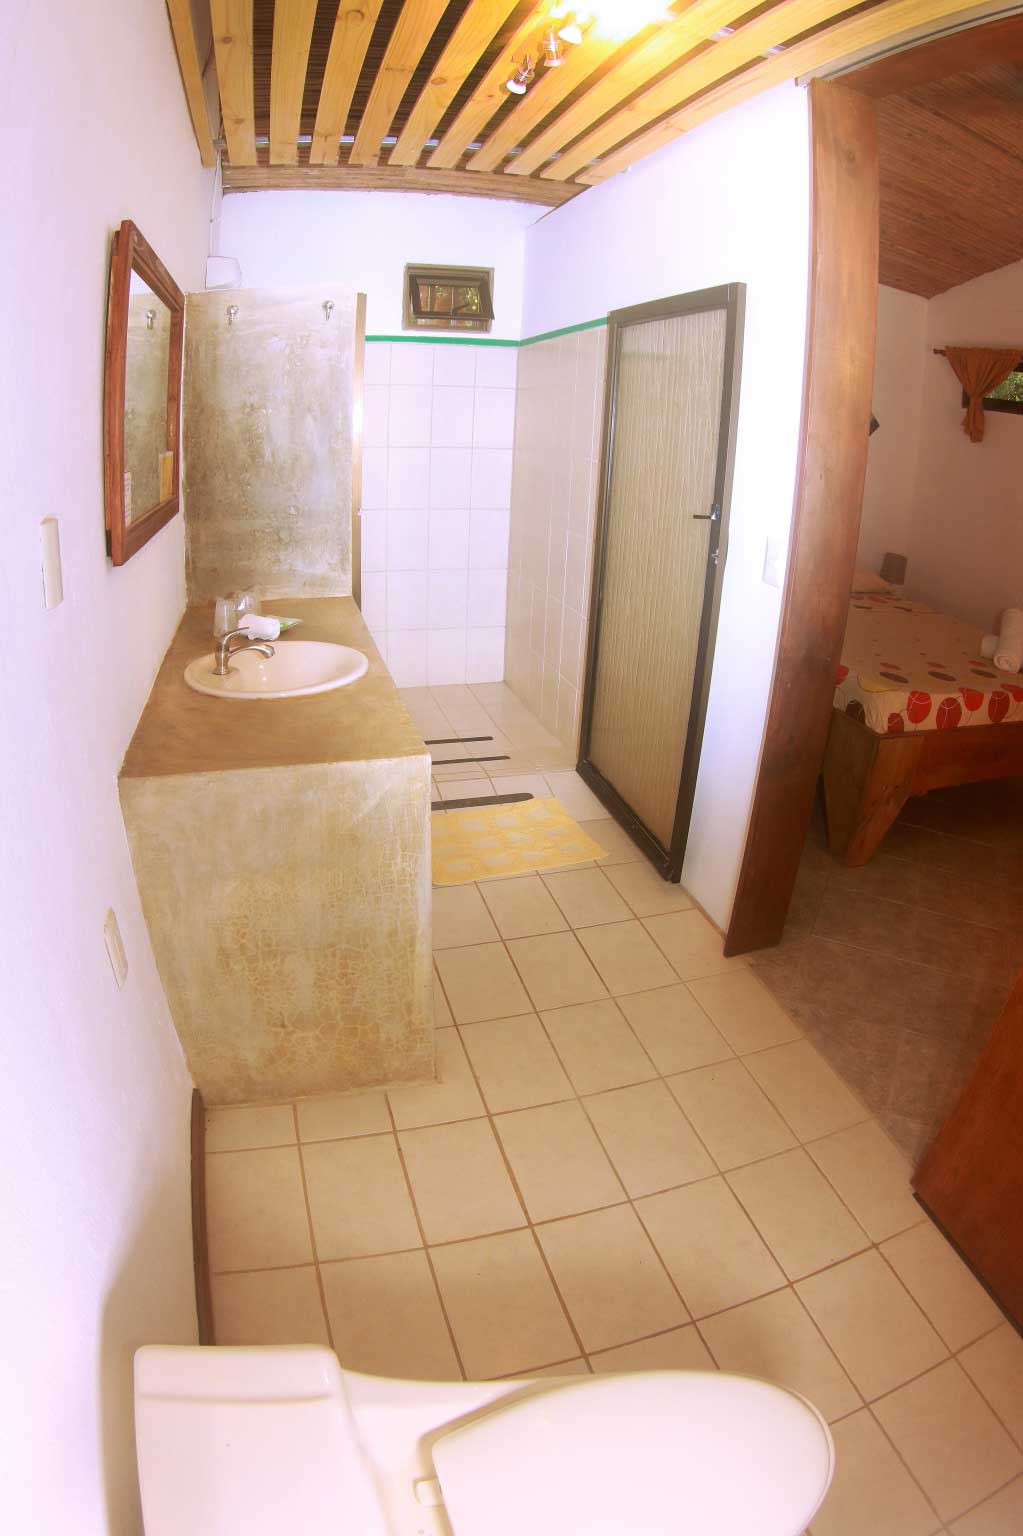 En suite bathroom of double room at Indra Inn furnished with a concrete countertop and tiled floors